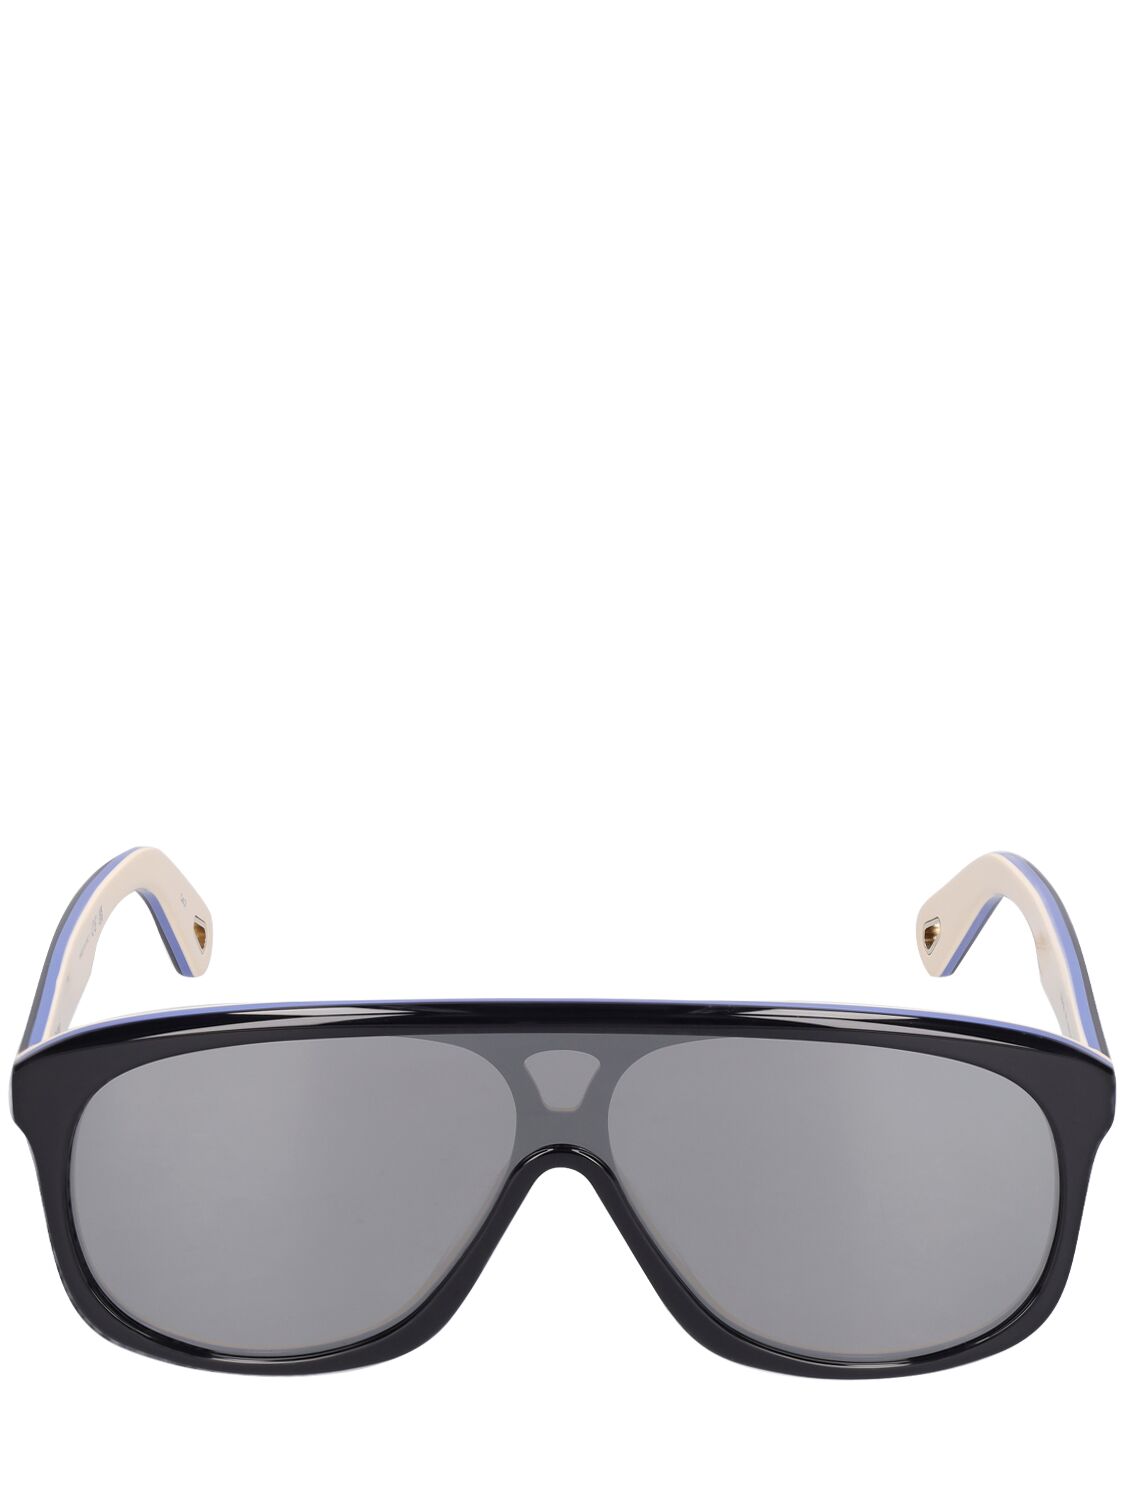 Chloé Mountaineering After Ski Sunglasses In Black